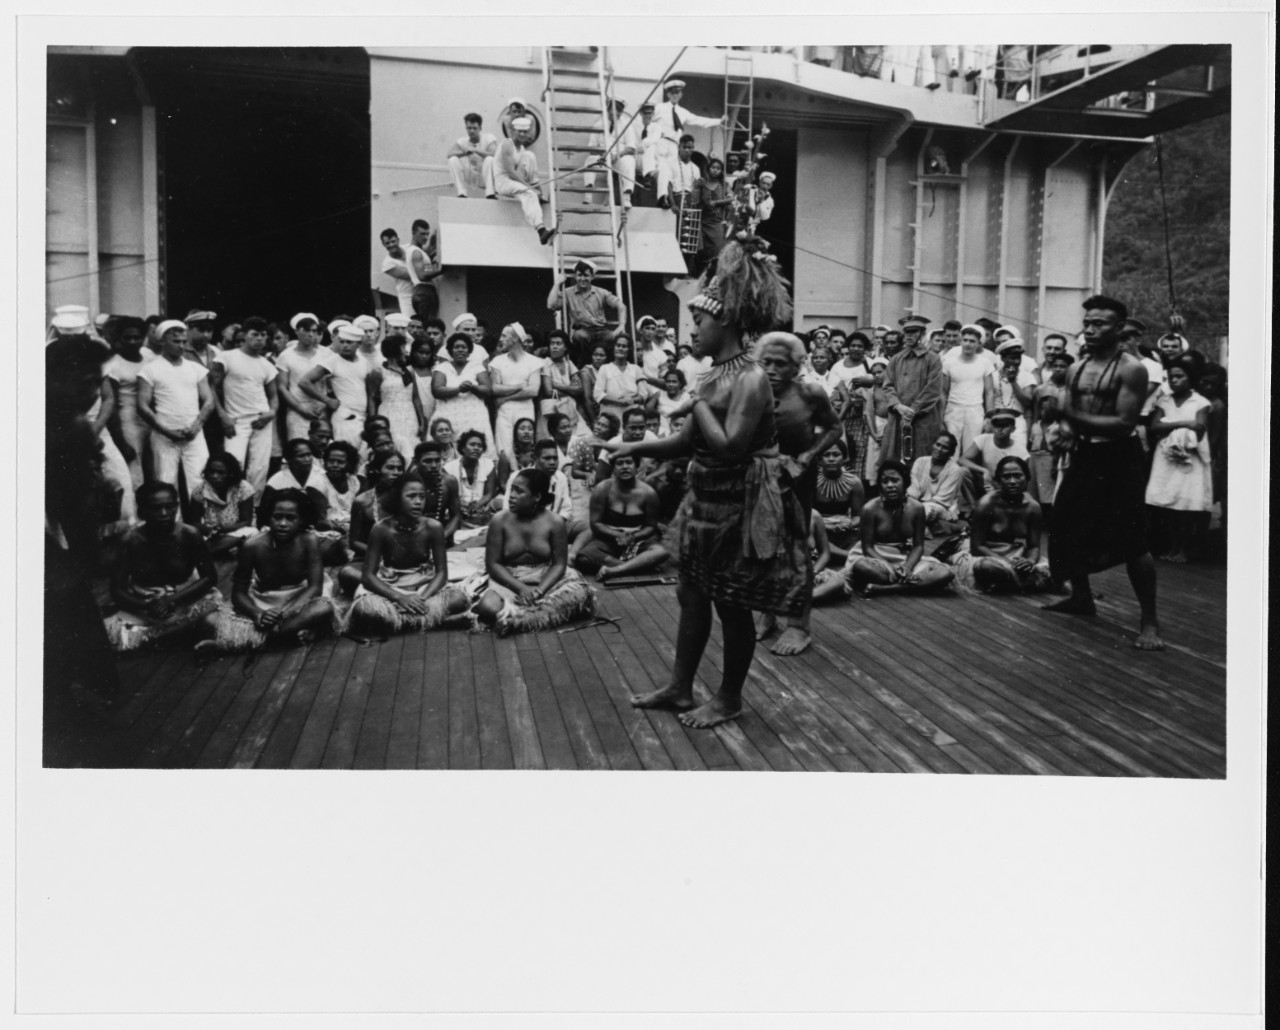 A native dancer welcomes Chicago and her ship’s company during the ship’s shakedown cruise at Papeete, Tahiti, 1931. (Courtesy of Wiley H. Smith, Naval History and Heritage Command Photograph NH 93460)